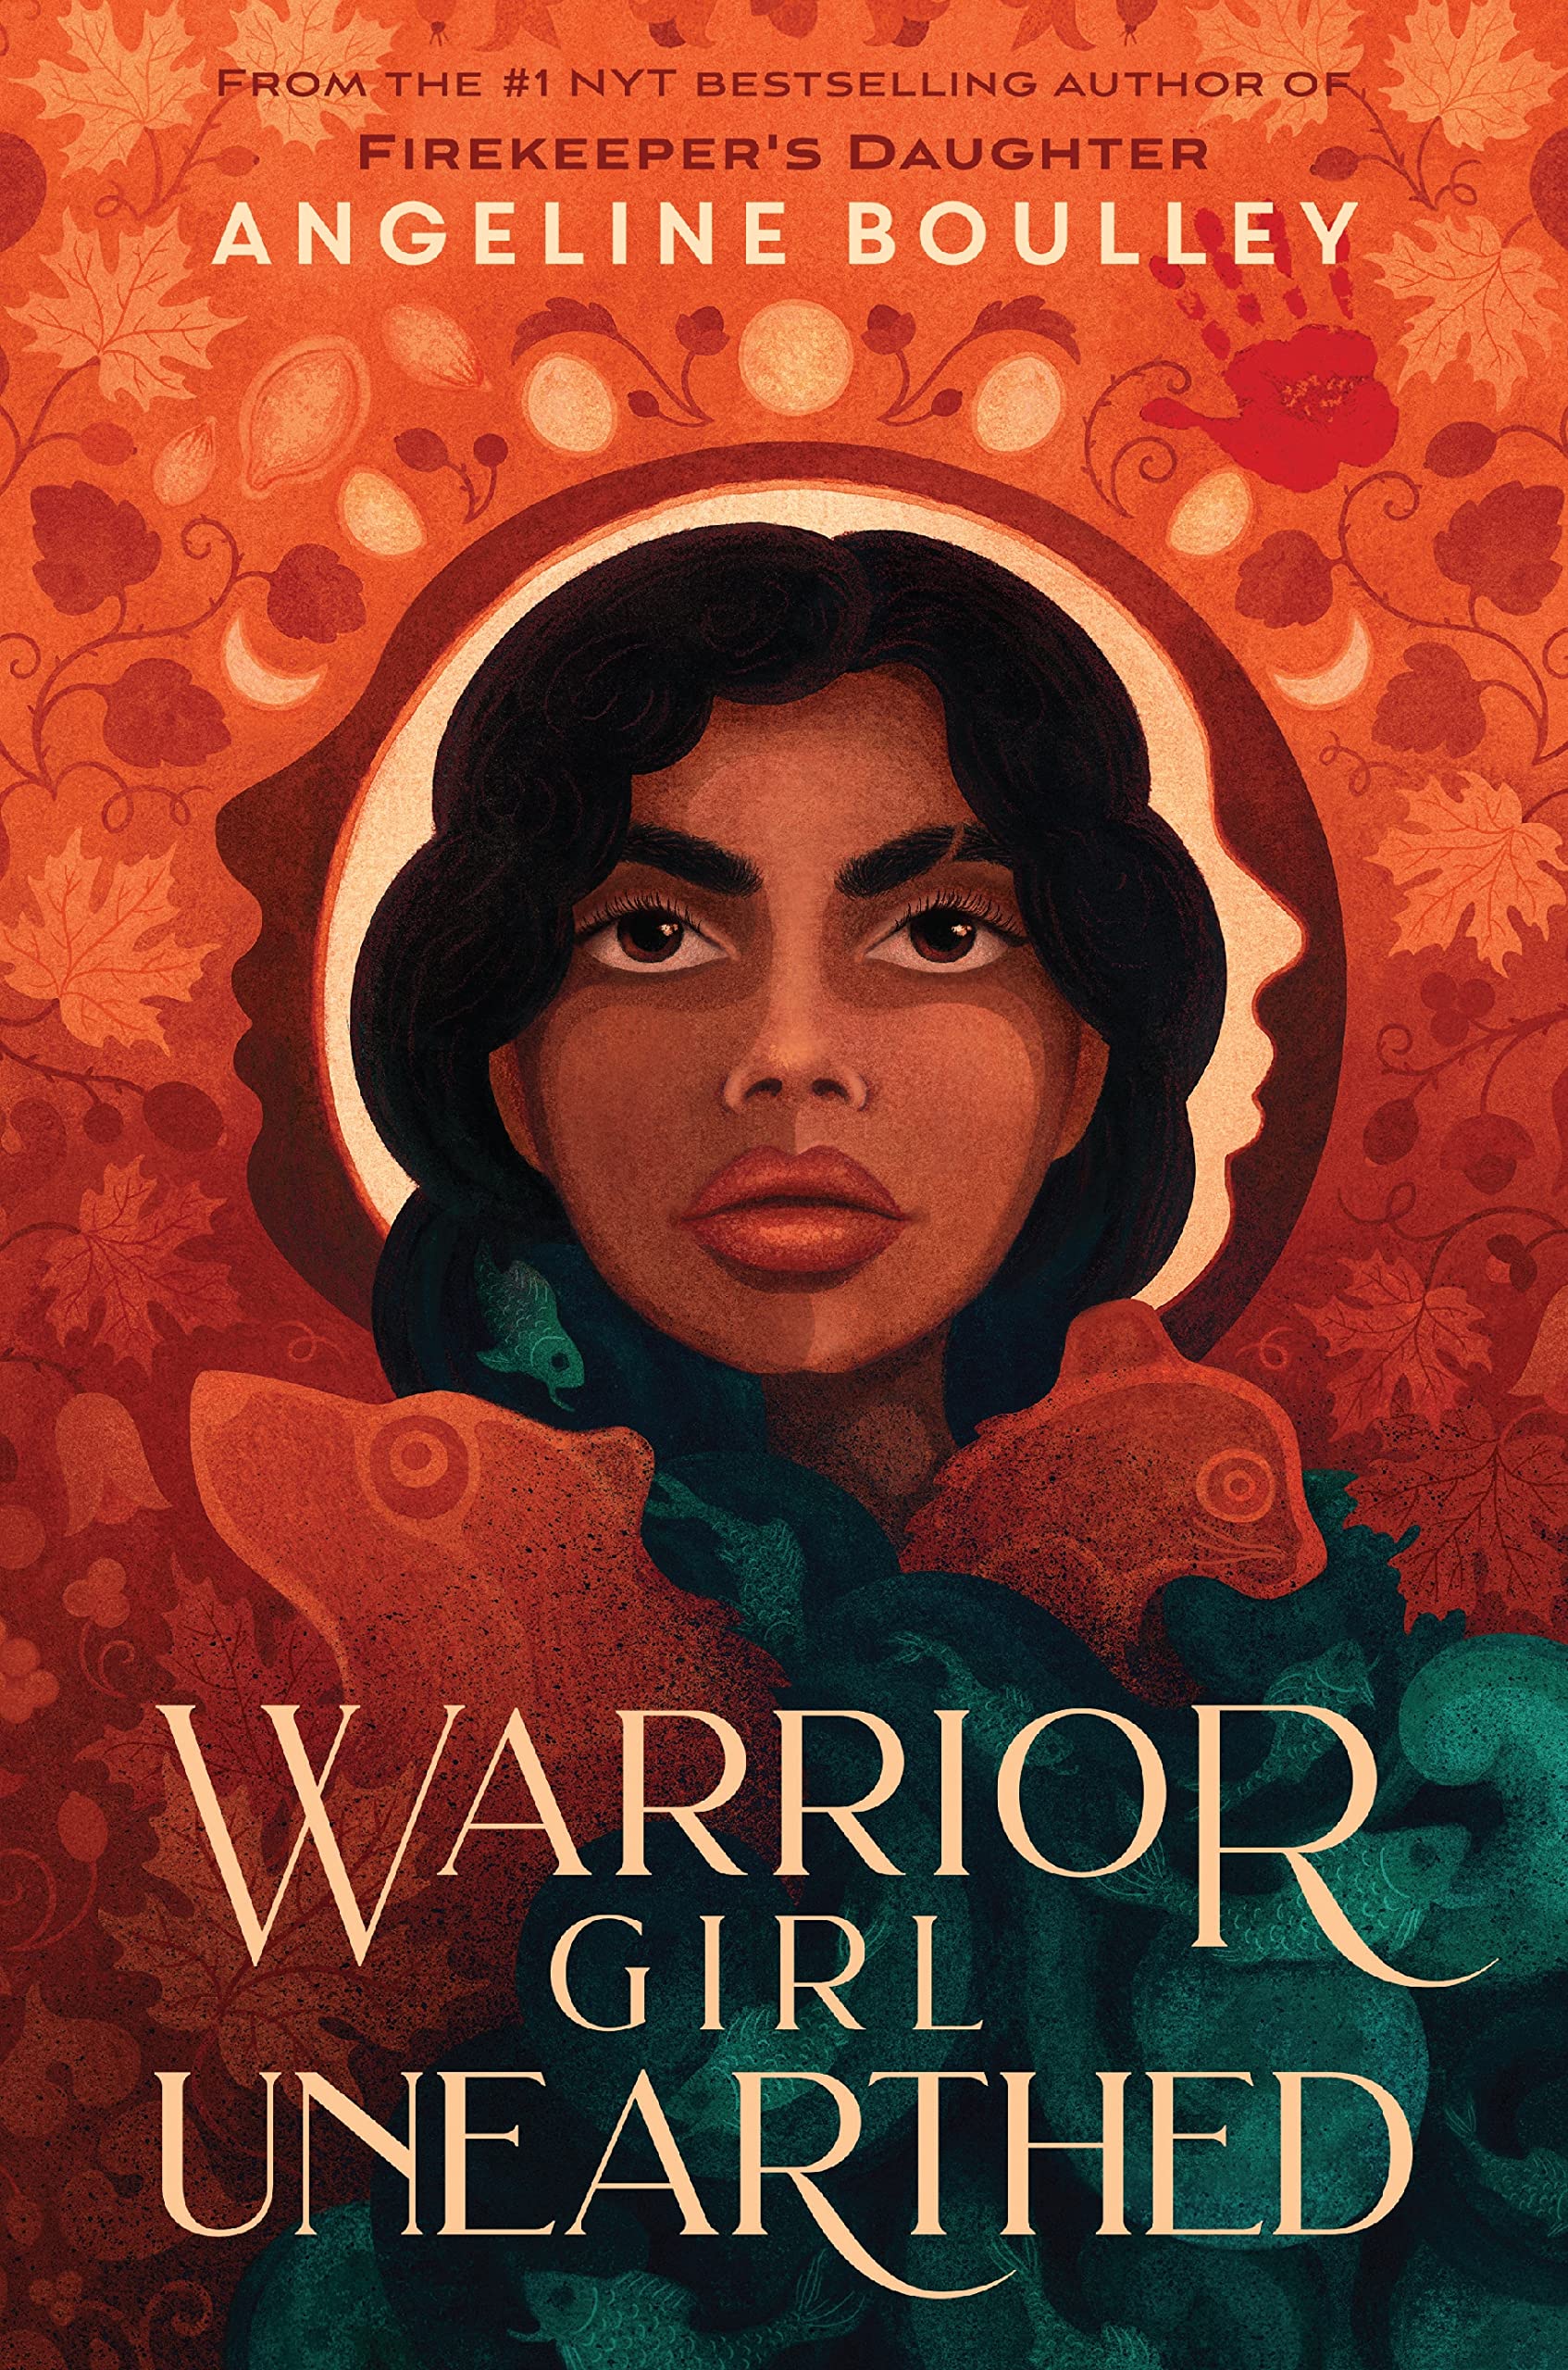 Warrior Girl Unearthed by Angeine Boulley